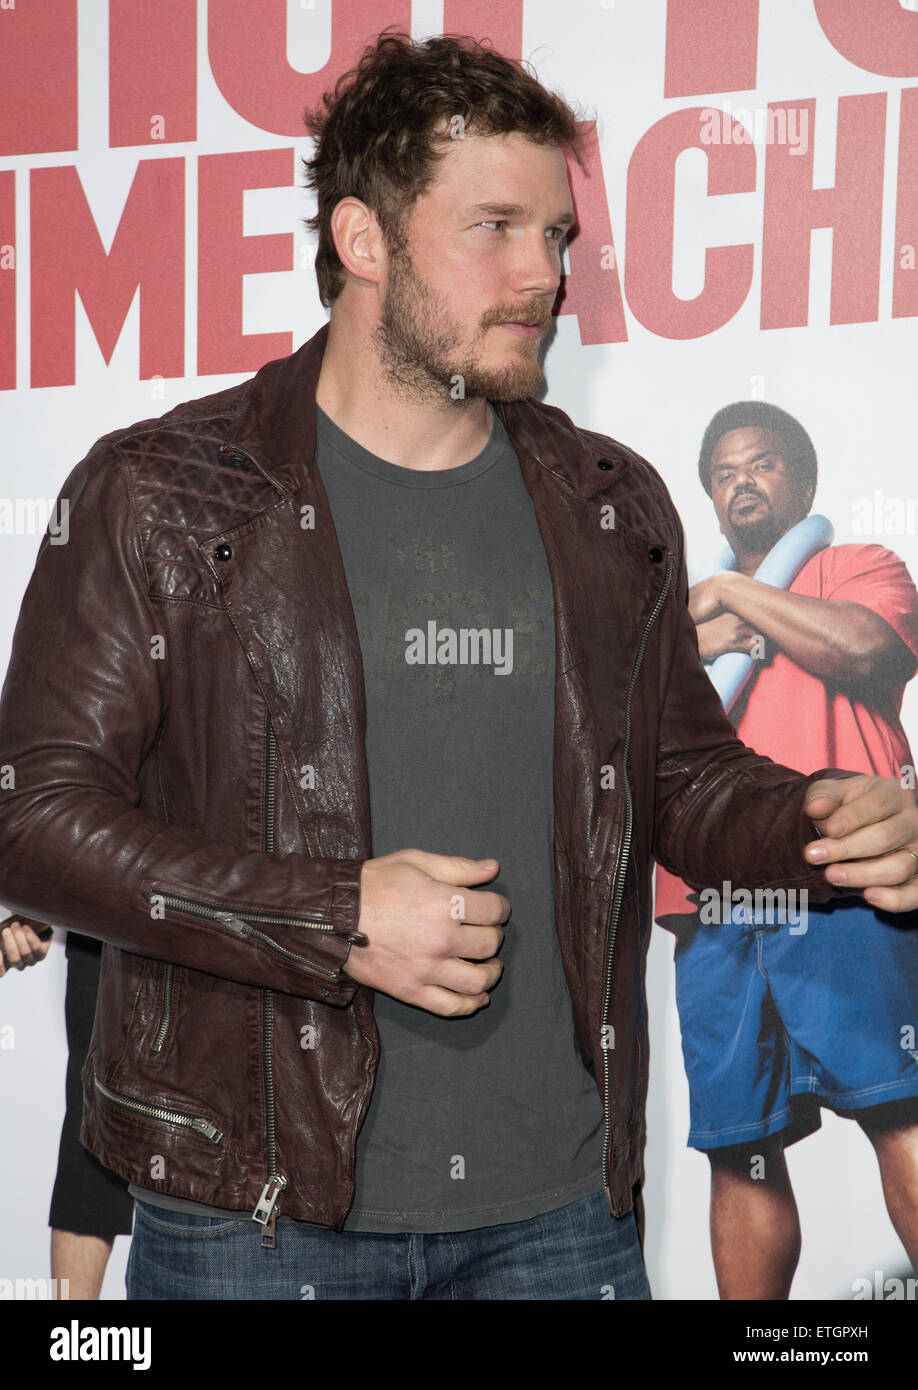 Los Angeles premiere of 'Hot Tub Time Machine 2' at the Bruin Theater - Red Carpet Arrivals  Featuring: Chris Pratt Where: Los Angeles, California, United States When: 18 Feb 2015 Credit: Brian To/WENN.com Stock Photo